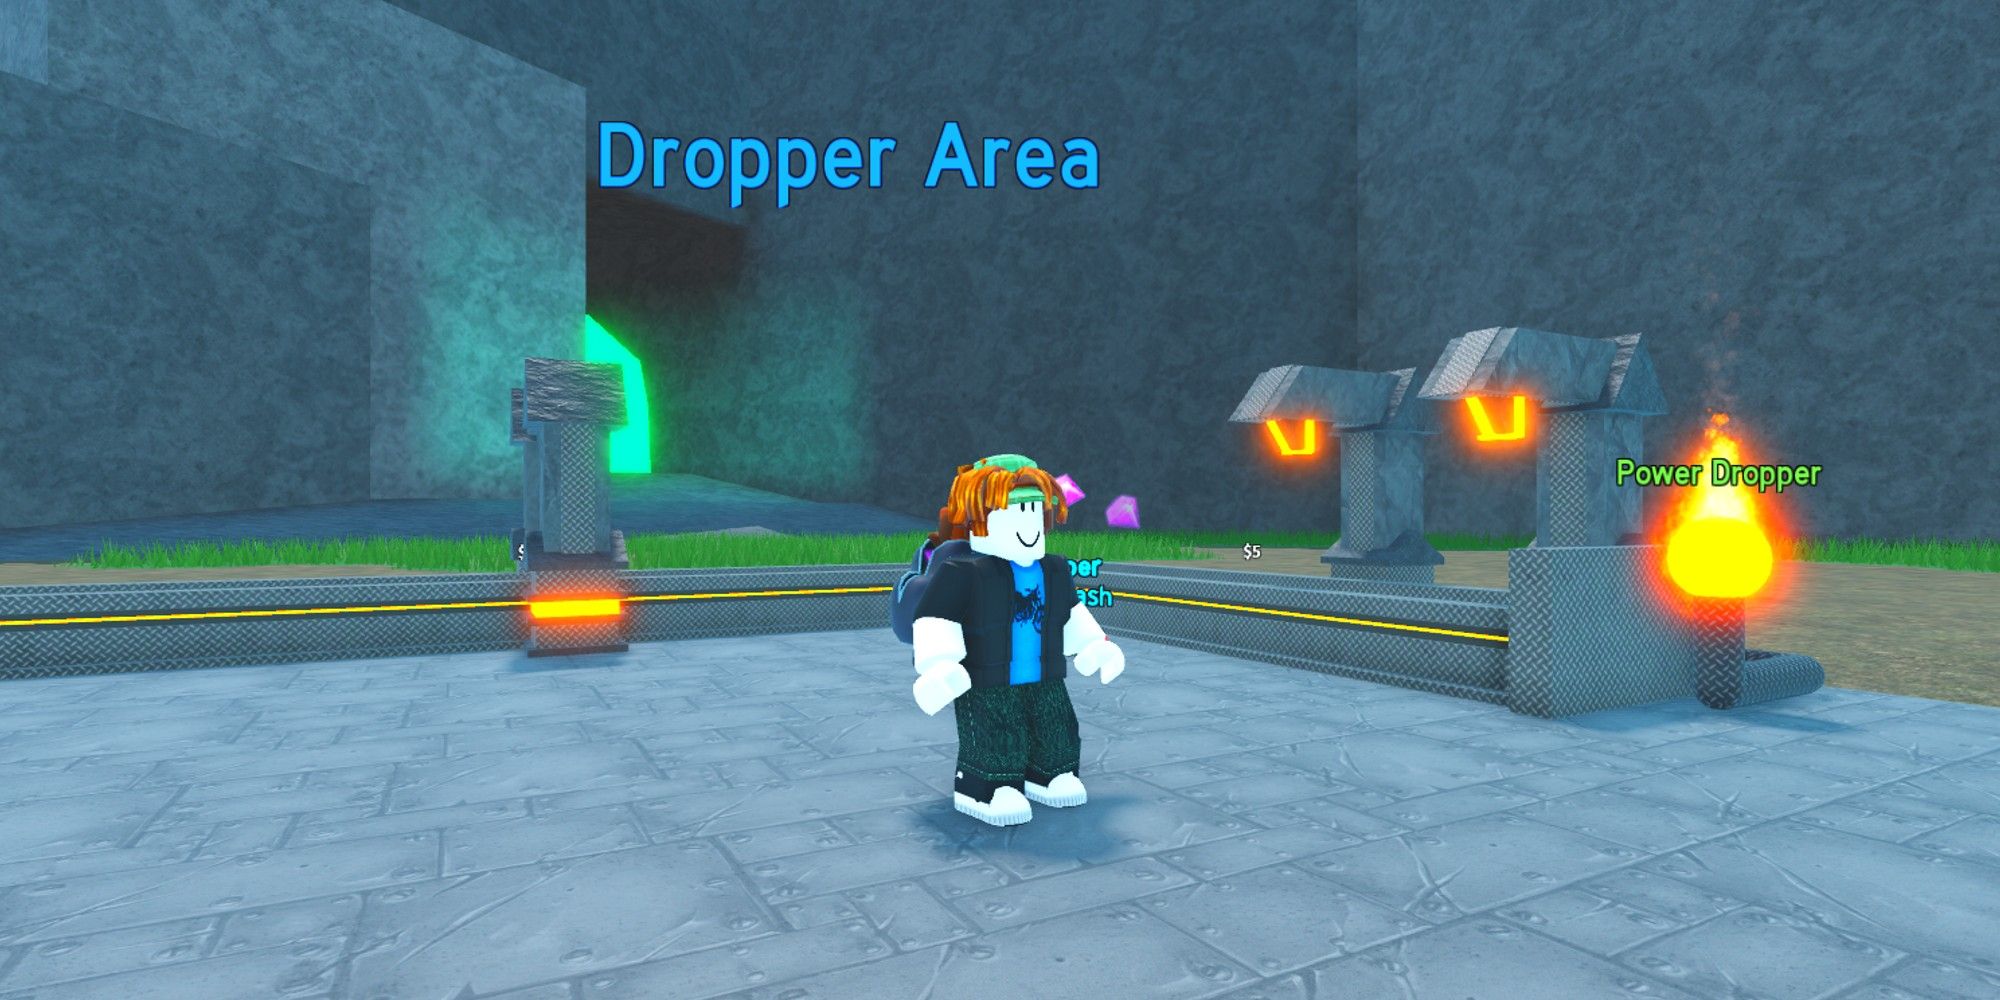 Character Upgrading Their Dropper